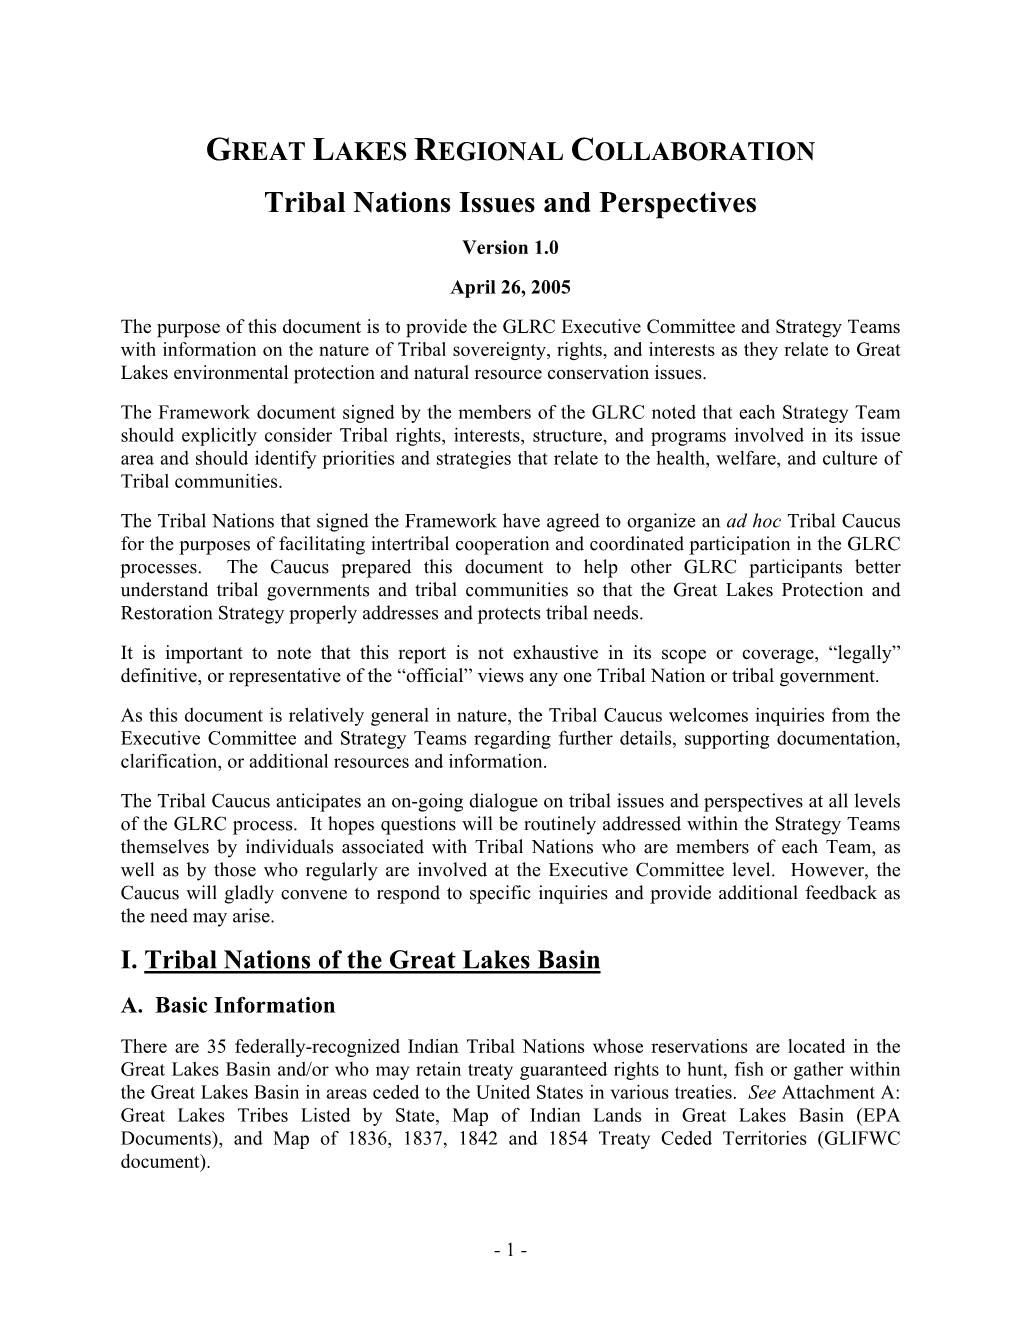 Tribal Nations Issues and Perspectives